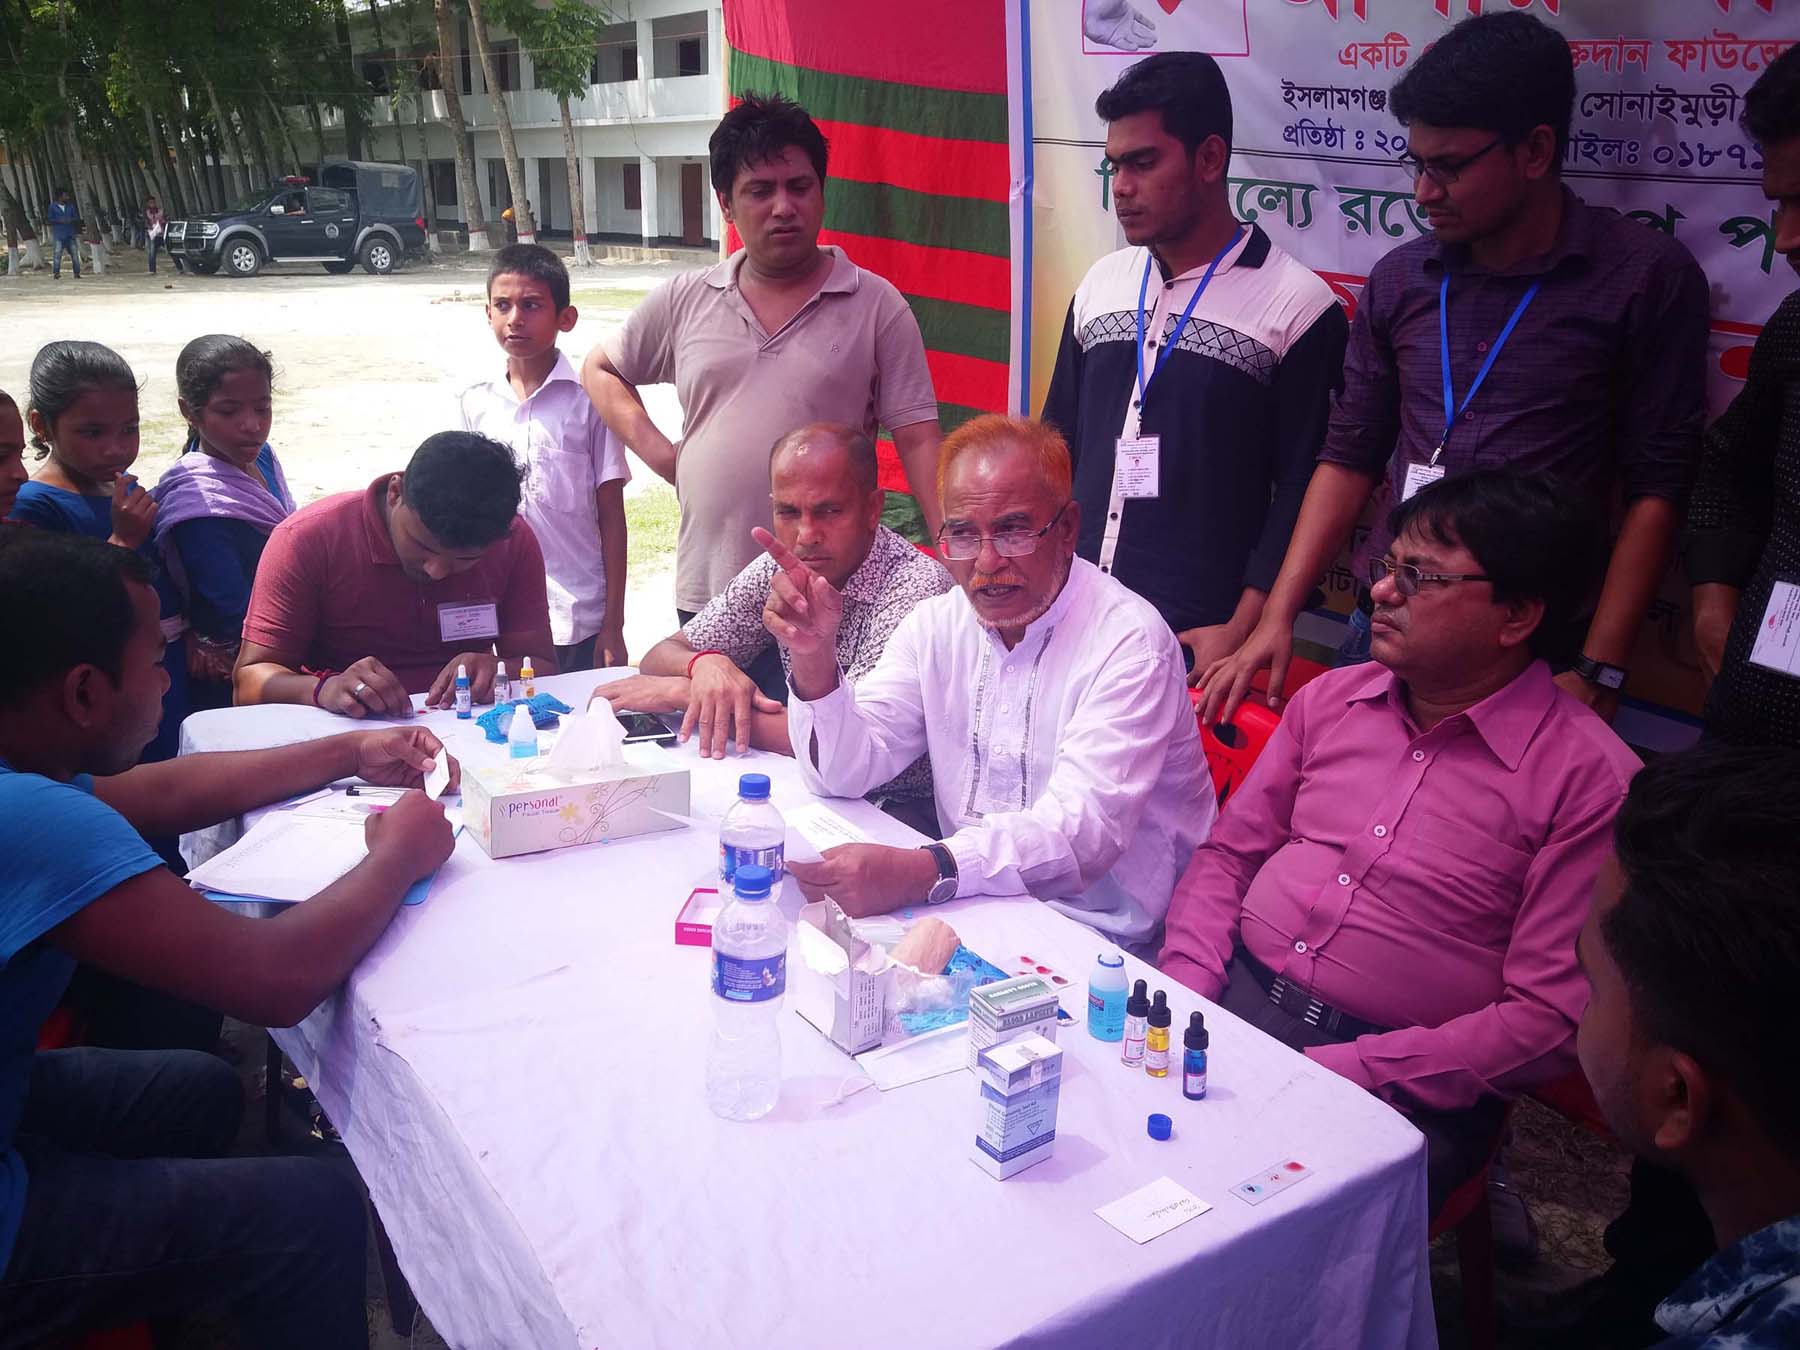 In the picture- Chairman of Begamganj-Sonaimuri Shikkha O Sastha Unnayan Foundation and Principal, Begumganj Technical & Computer Institute Md. Giash Uddin Mithu is seen as a guest at the Free Blood Camping event organized by the Ashar Aloha Foundation. Golam Mostafa, general secretary of the Sonimuri blind welfare association were present.